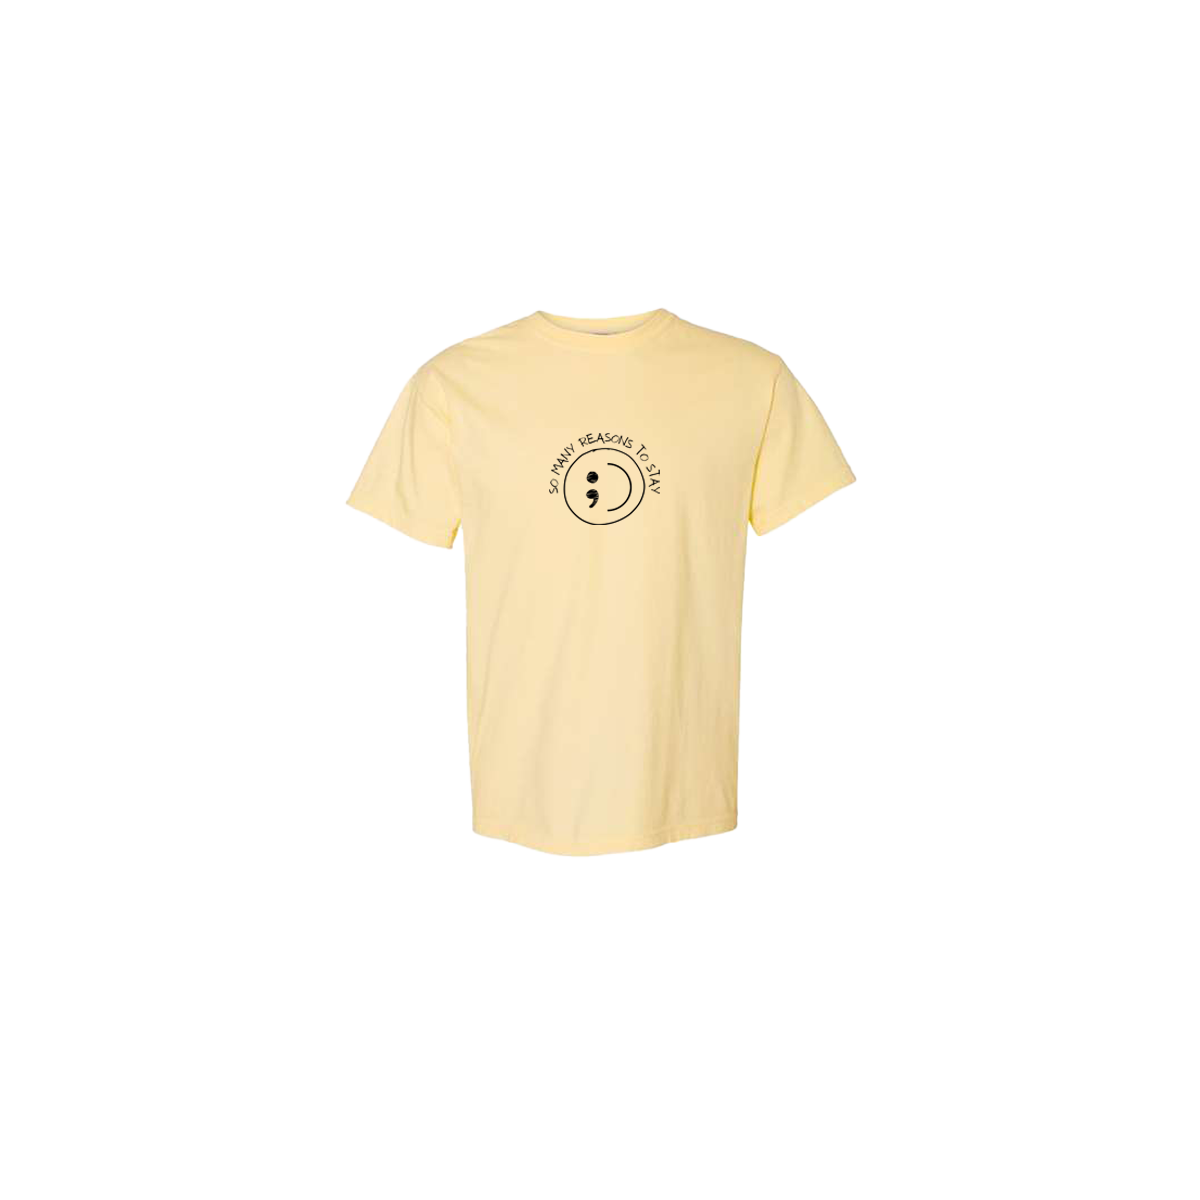 So Many Reasons to Stay Embroidered Yellow Tshirt - Mental Health Awareness Clothing